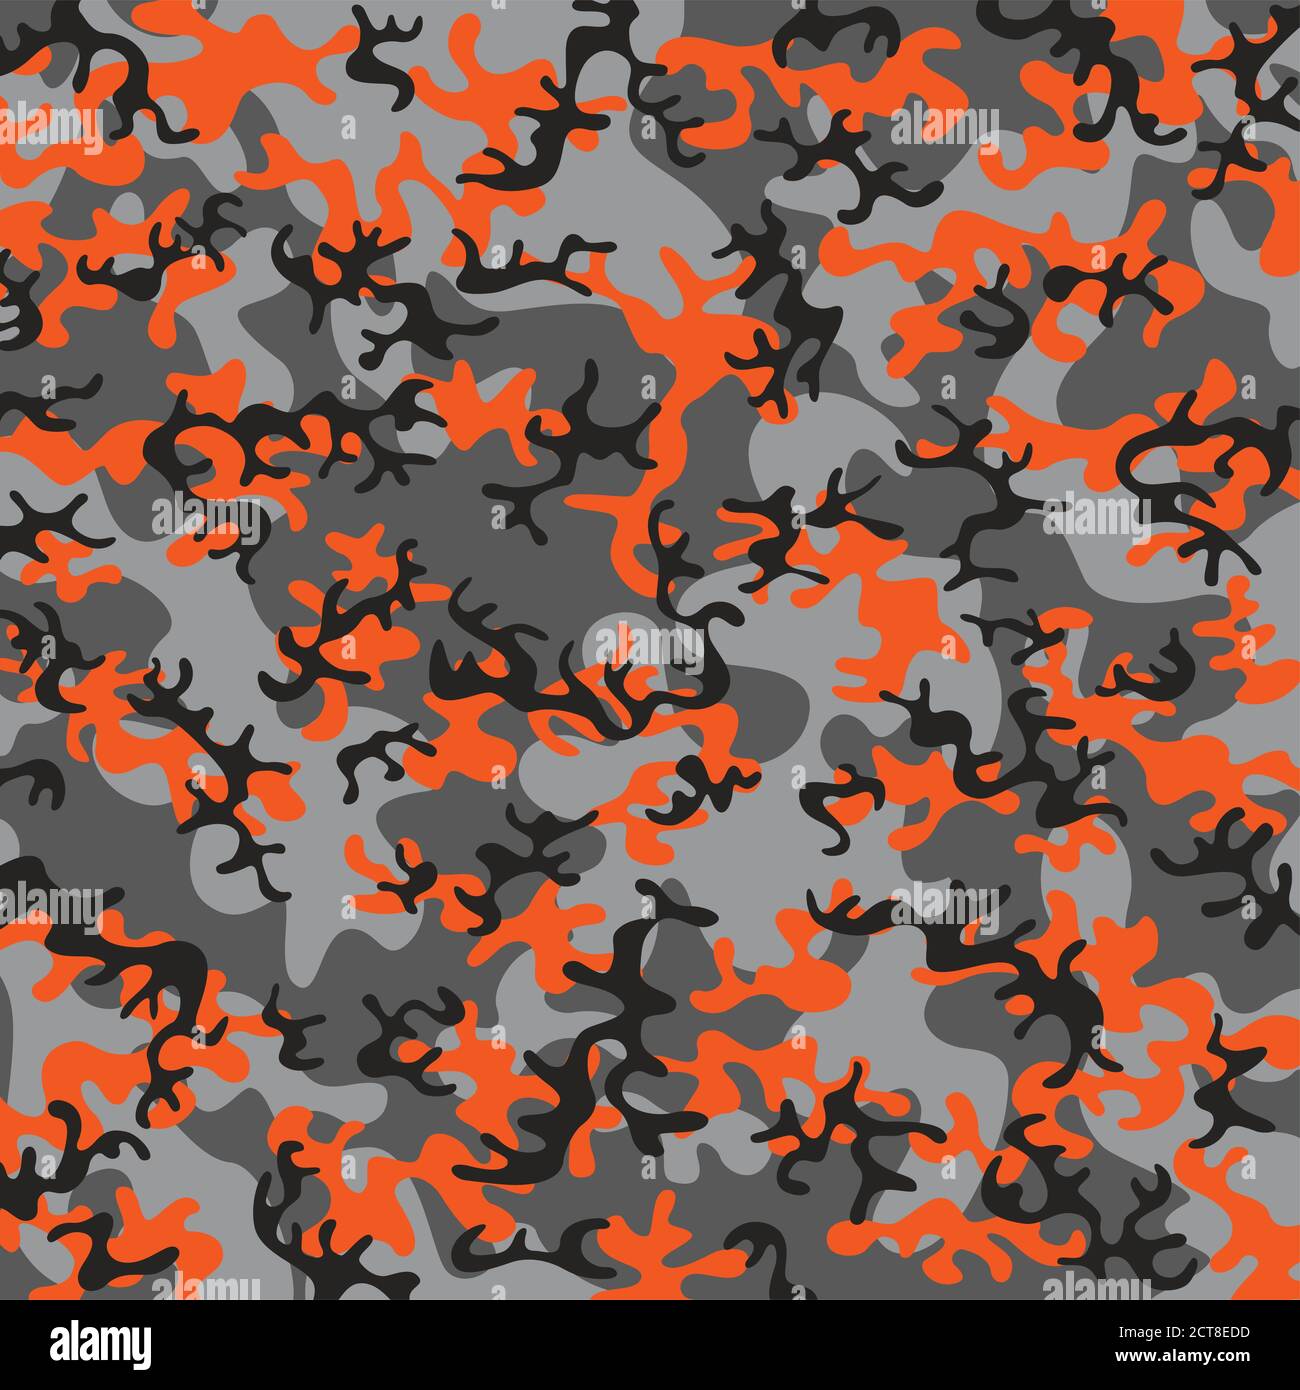 Military camouflage seamless pattern background Stock Photo